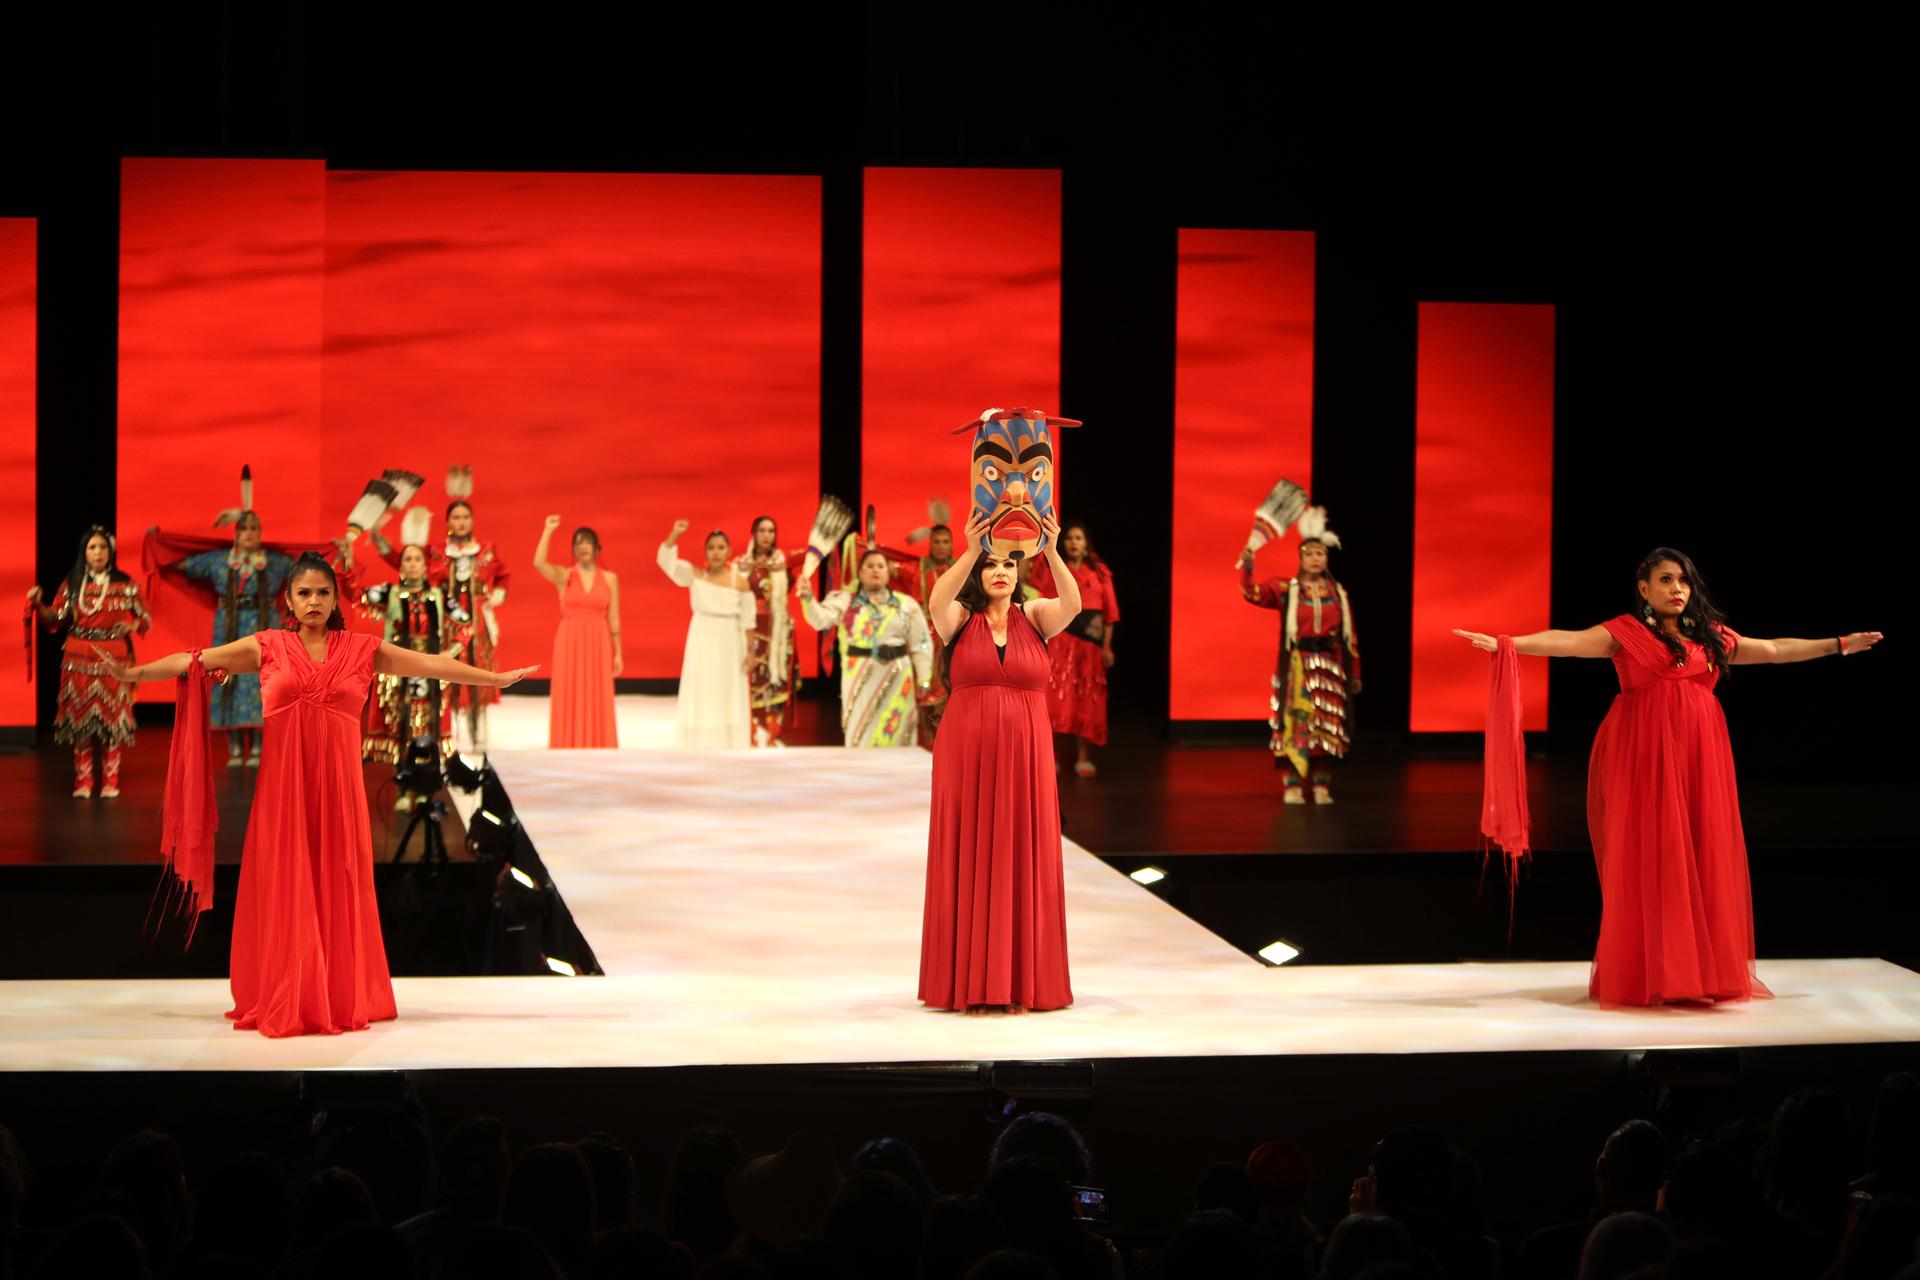 The Red Dress evening opened with a powerful representation of the strength and resilience of Indigenous women in a dance choreographed by Madelaine McCallum (center).